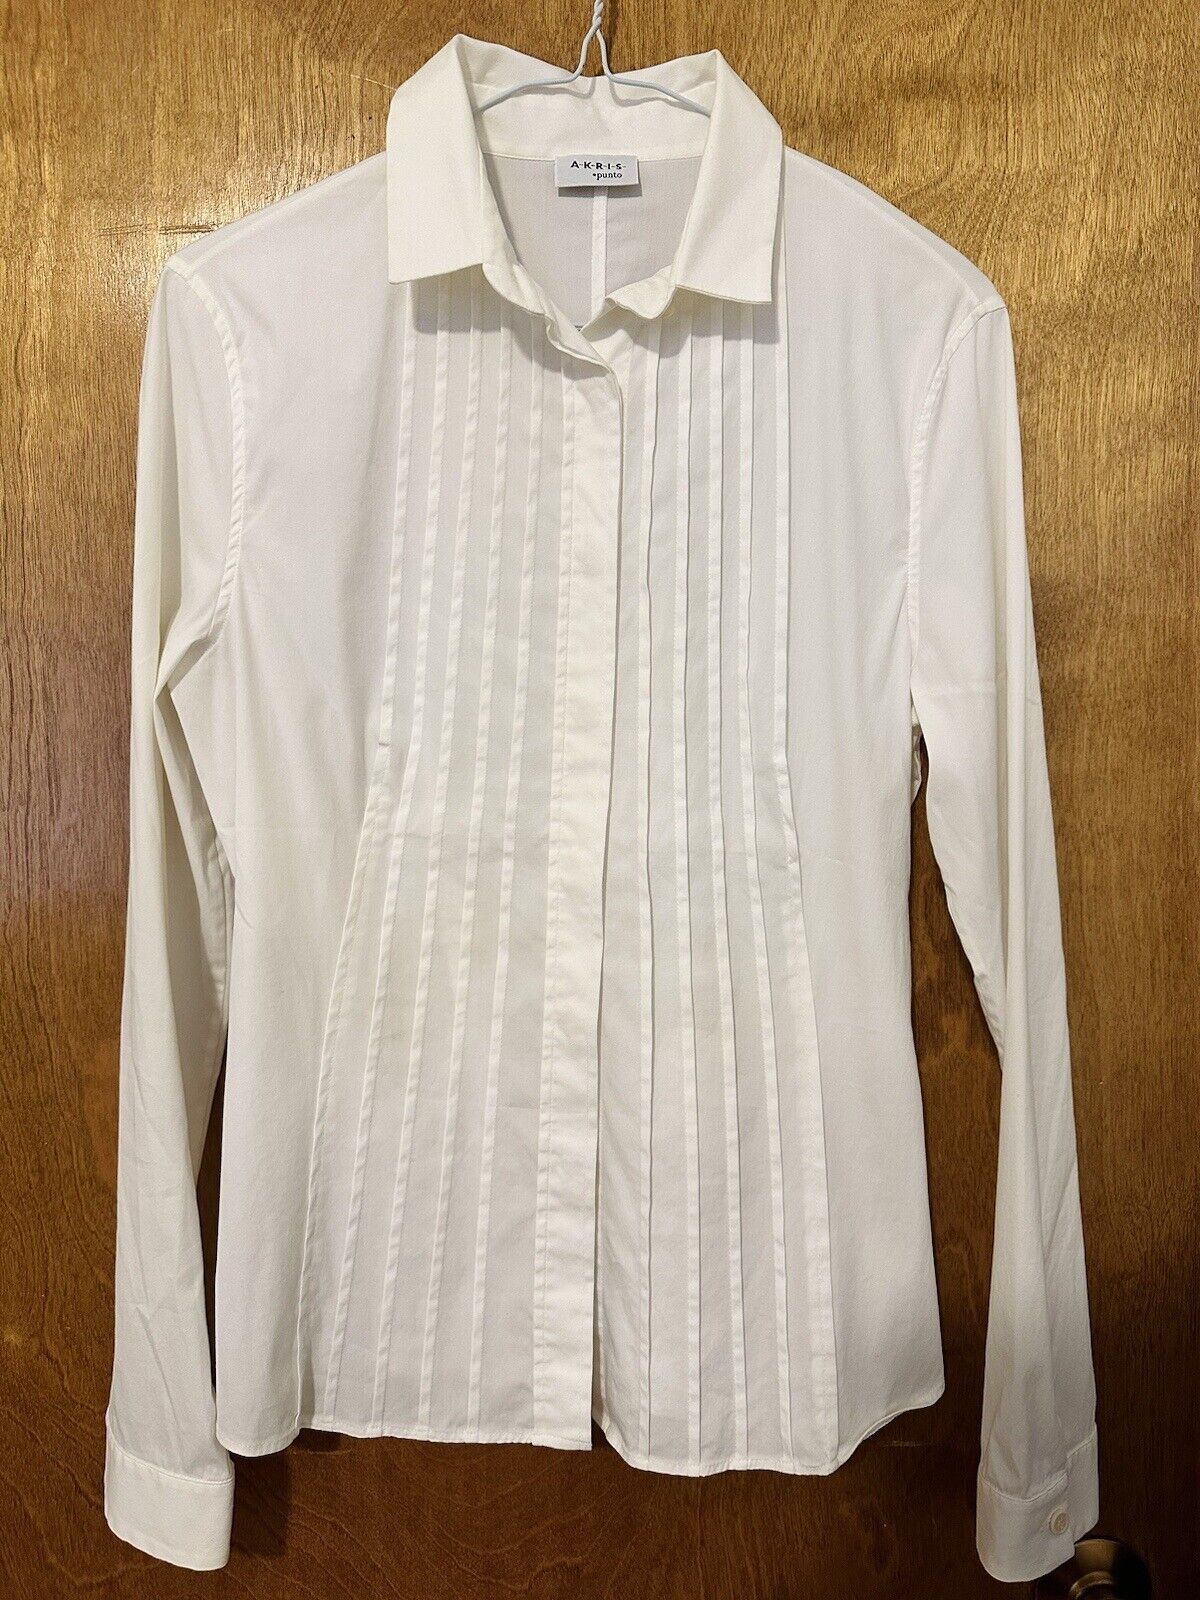 Akris Punto White Blouse Button-Up Shirt Pleated Size S - Pre-Owned